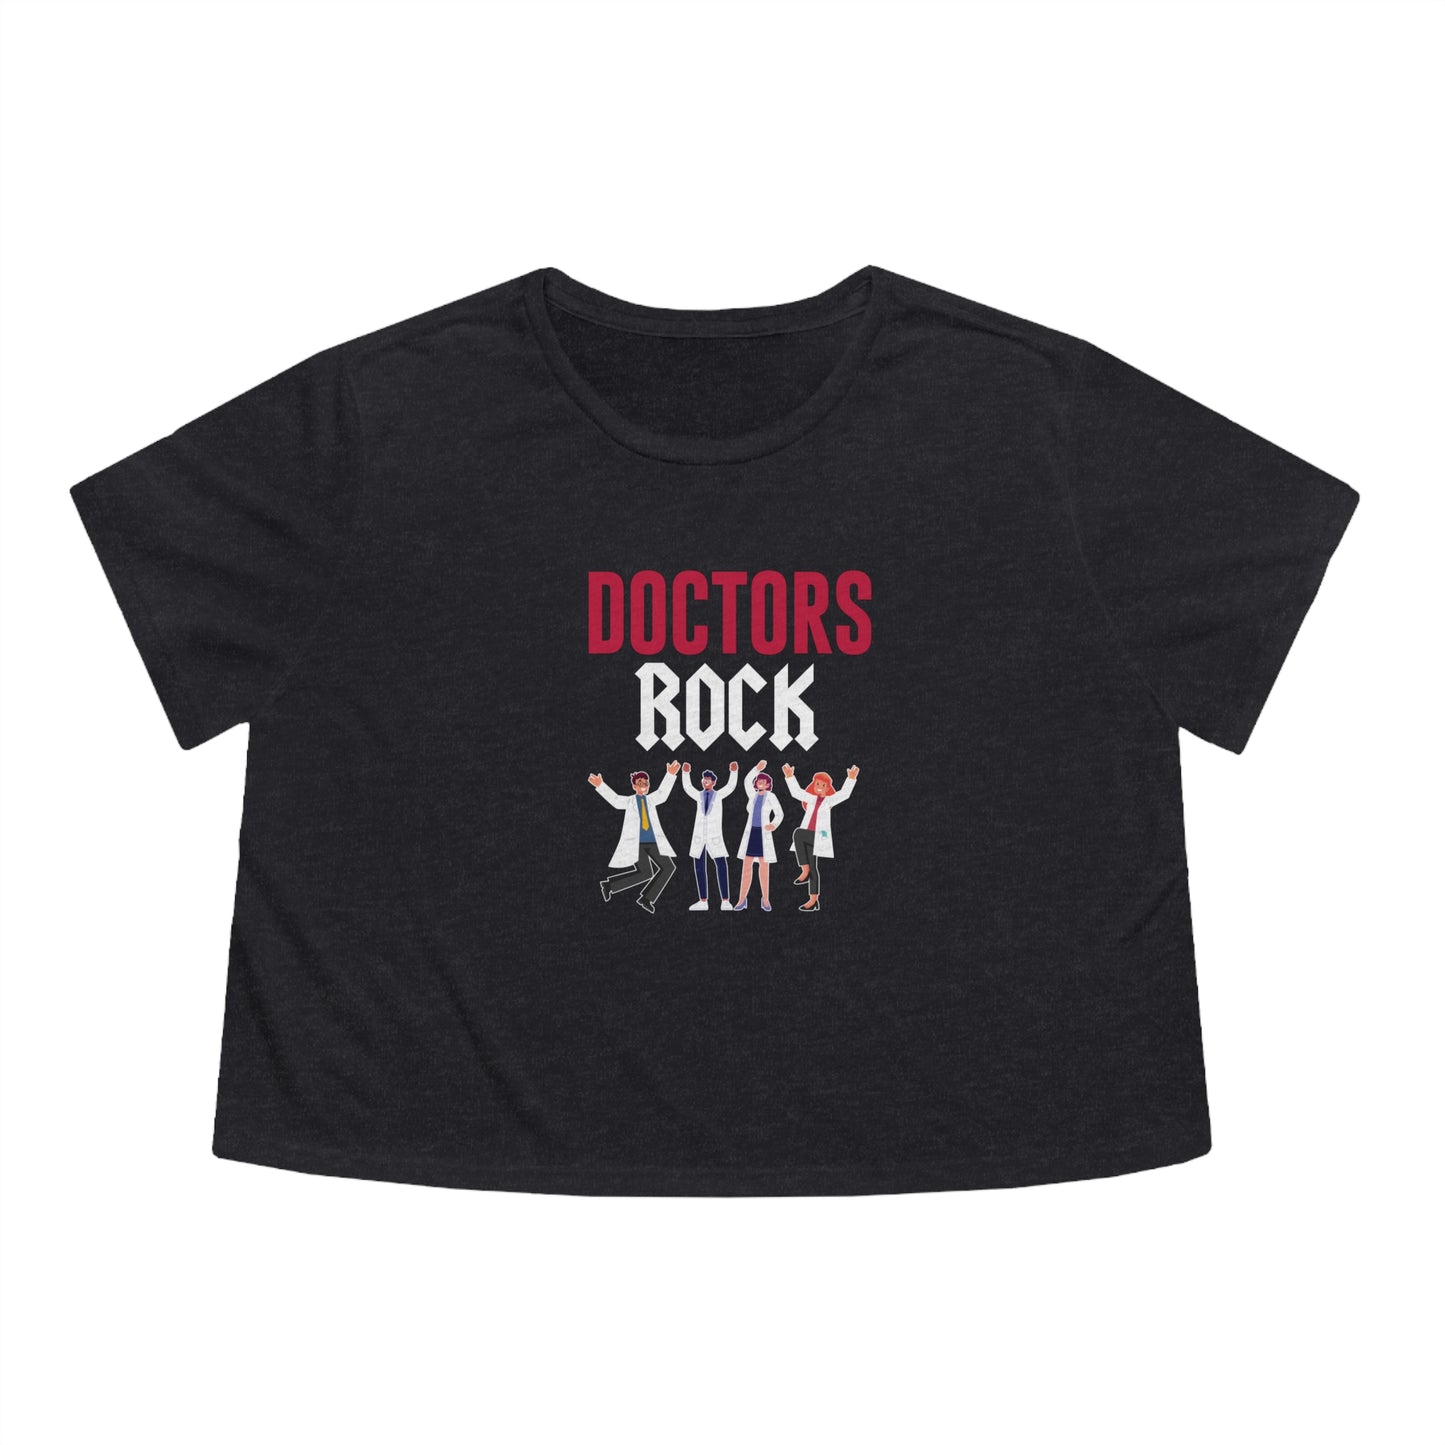 Doctors Rock Women's Flowy Cropped Tee, Doctor shirts, Doctor gift ideas, New Doctor shirt, gift for doctor, Doctor team shirt